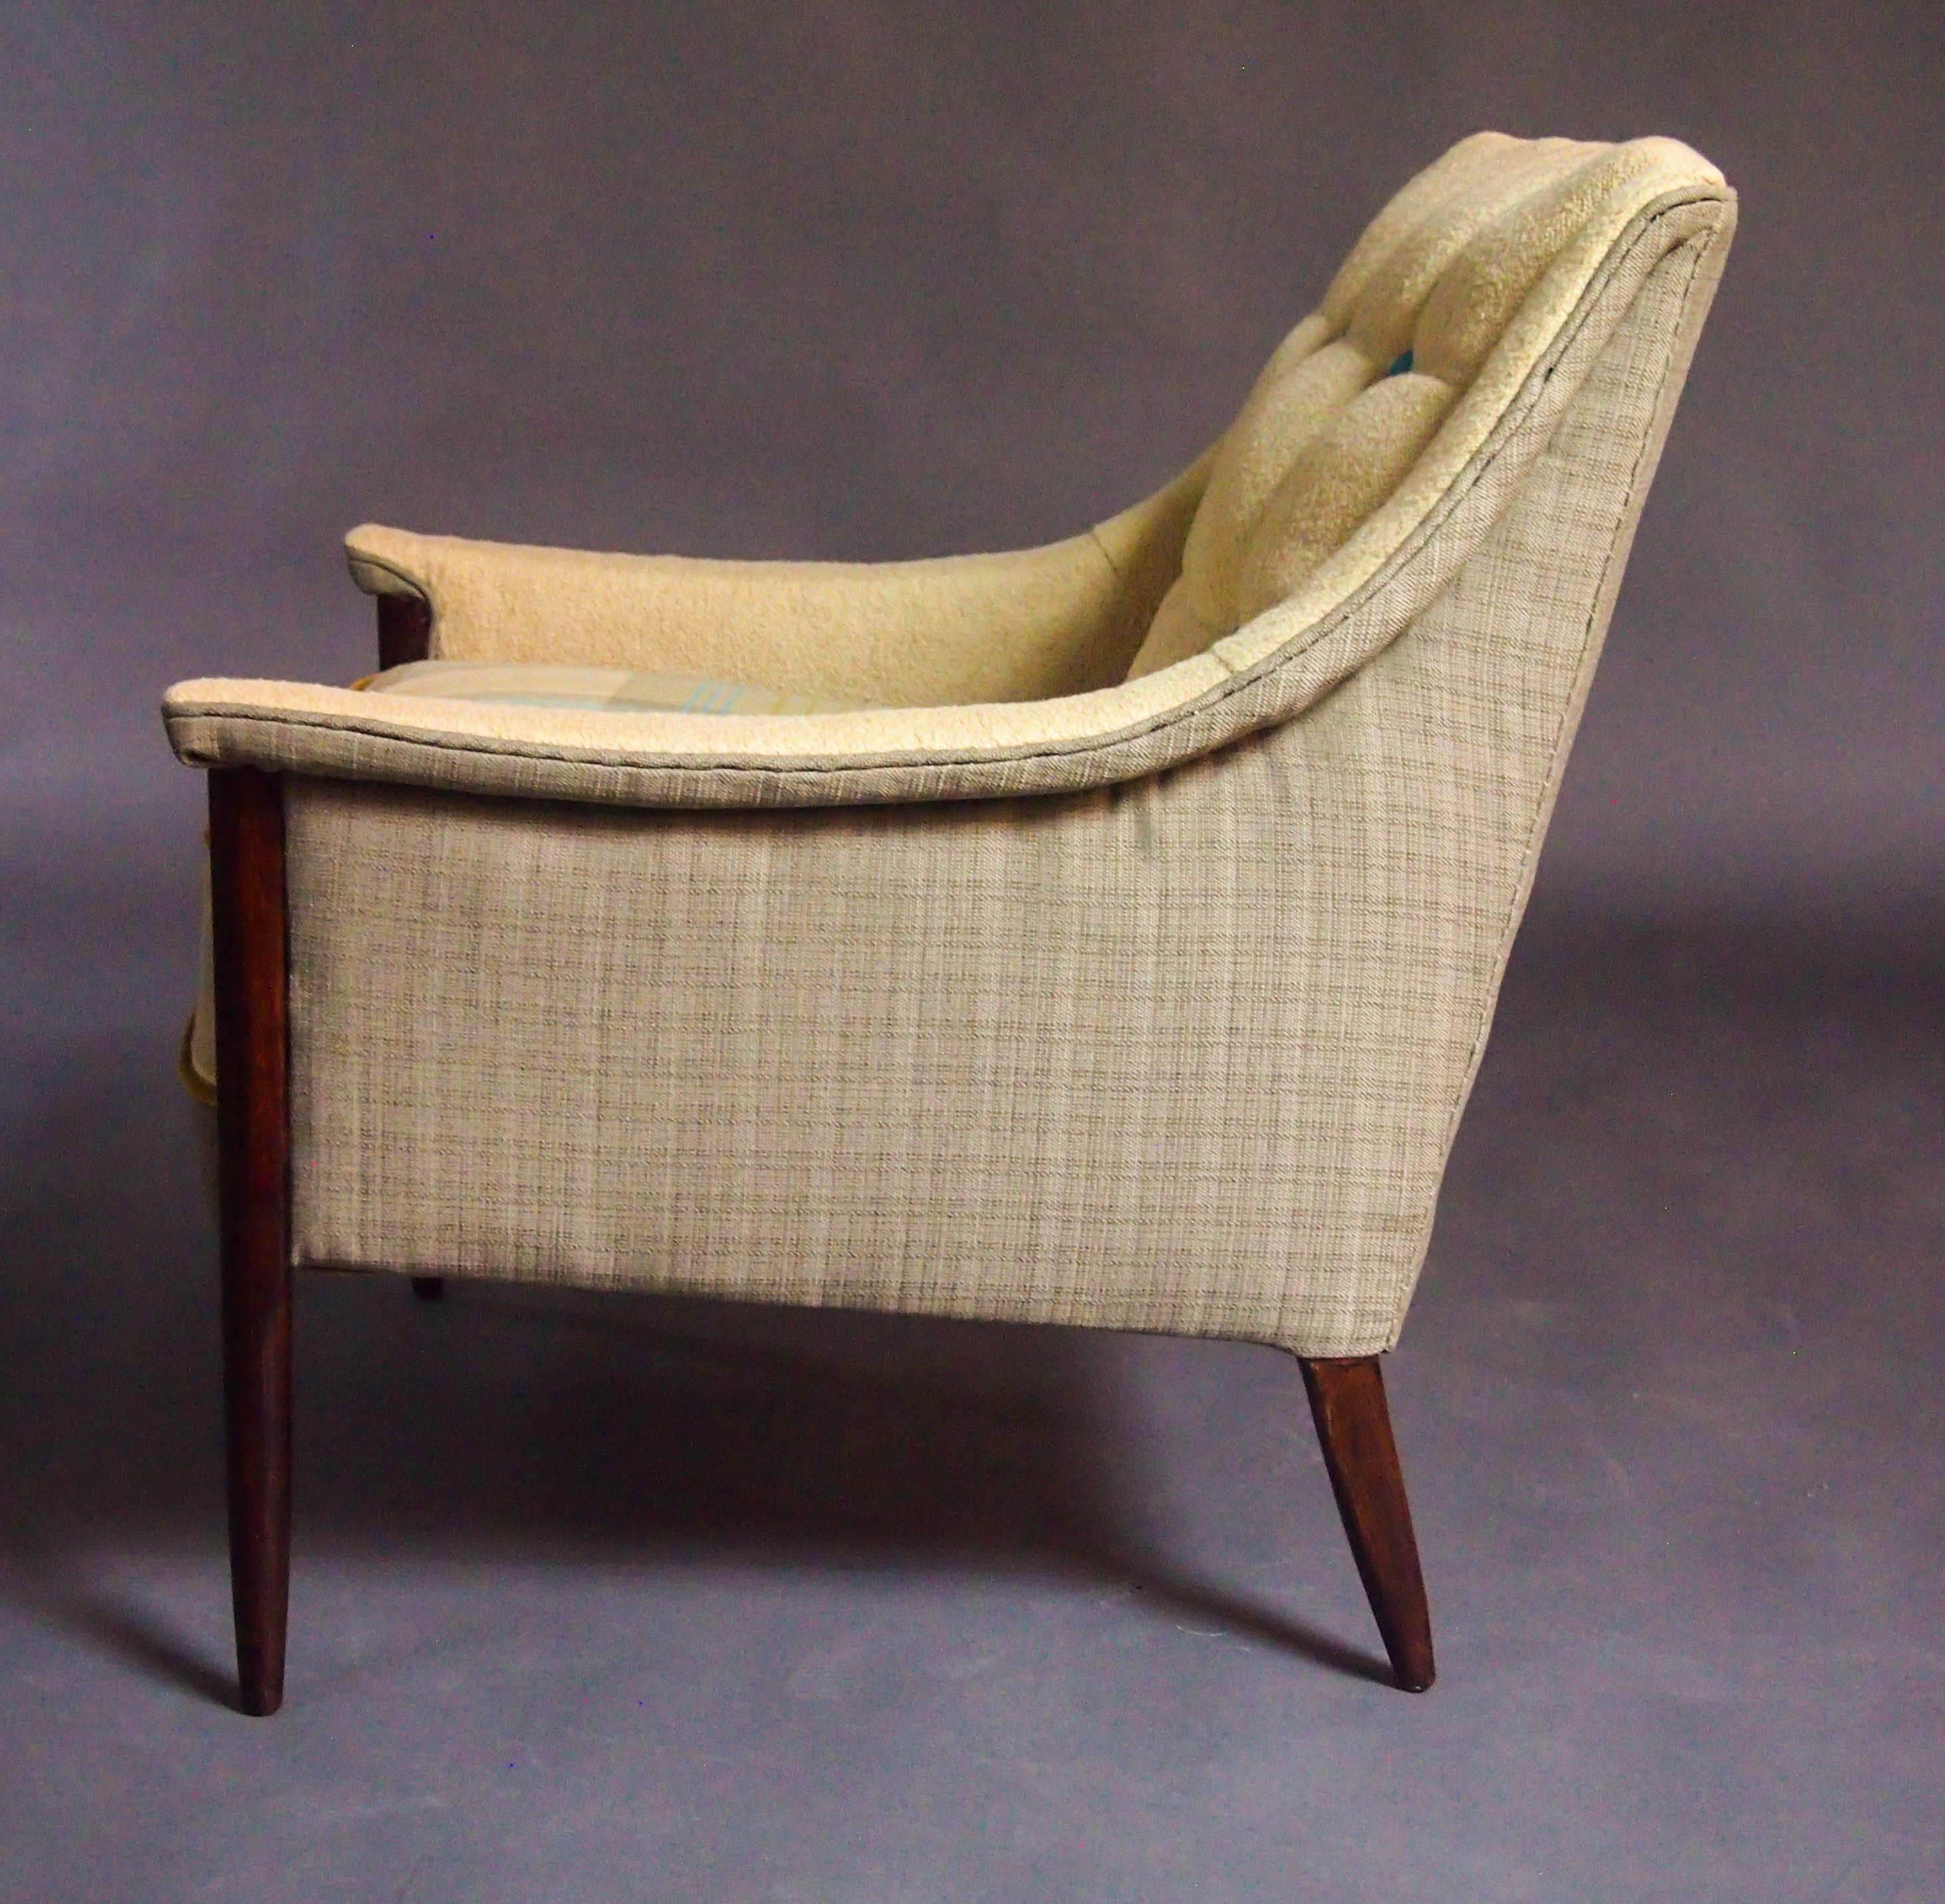 American Mid-Century Koehler Armchair in Ivory with Tan and Blue--in stock For Sale